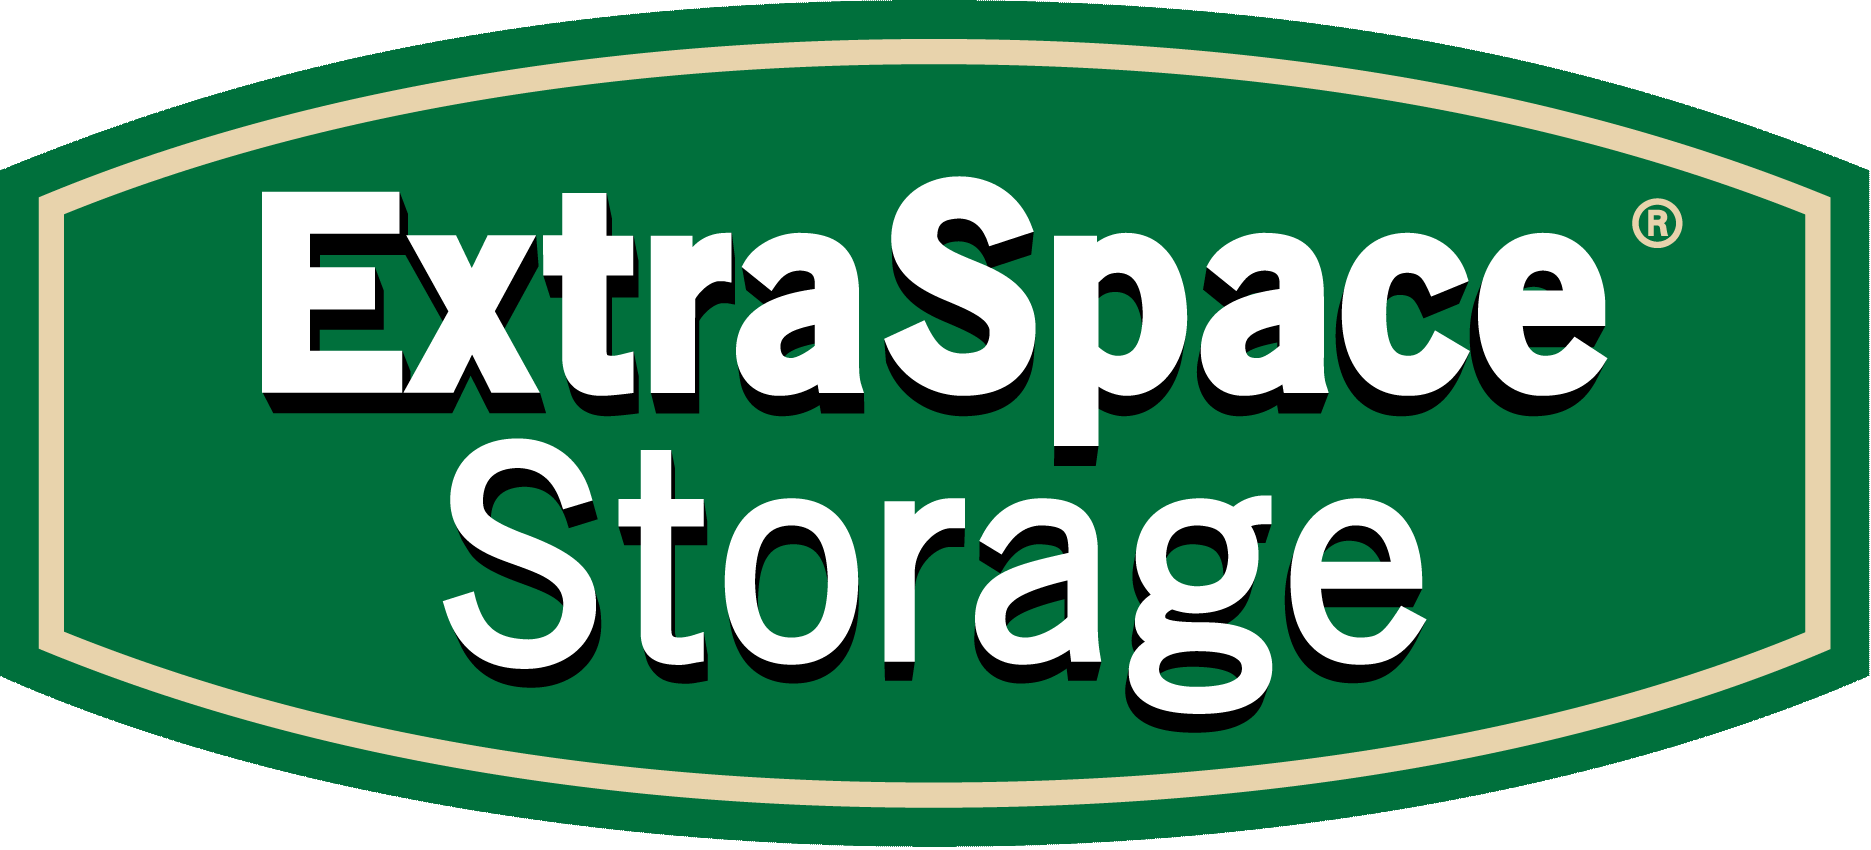 Extra Space Storage logo with white text on a green background